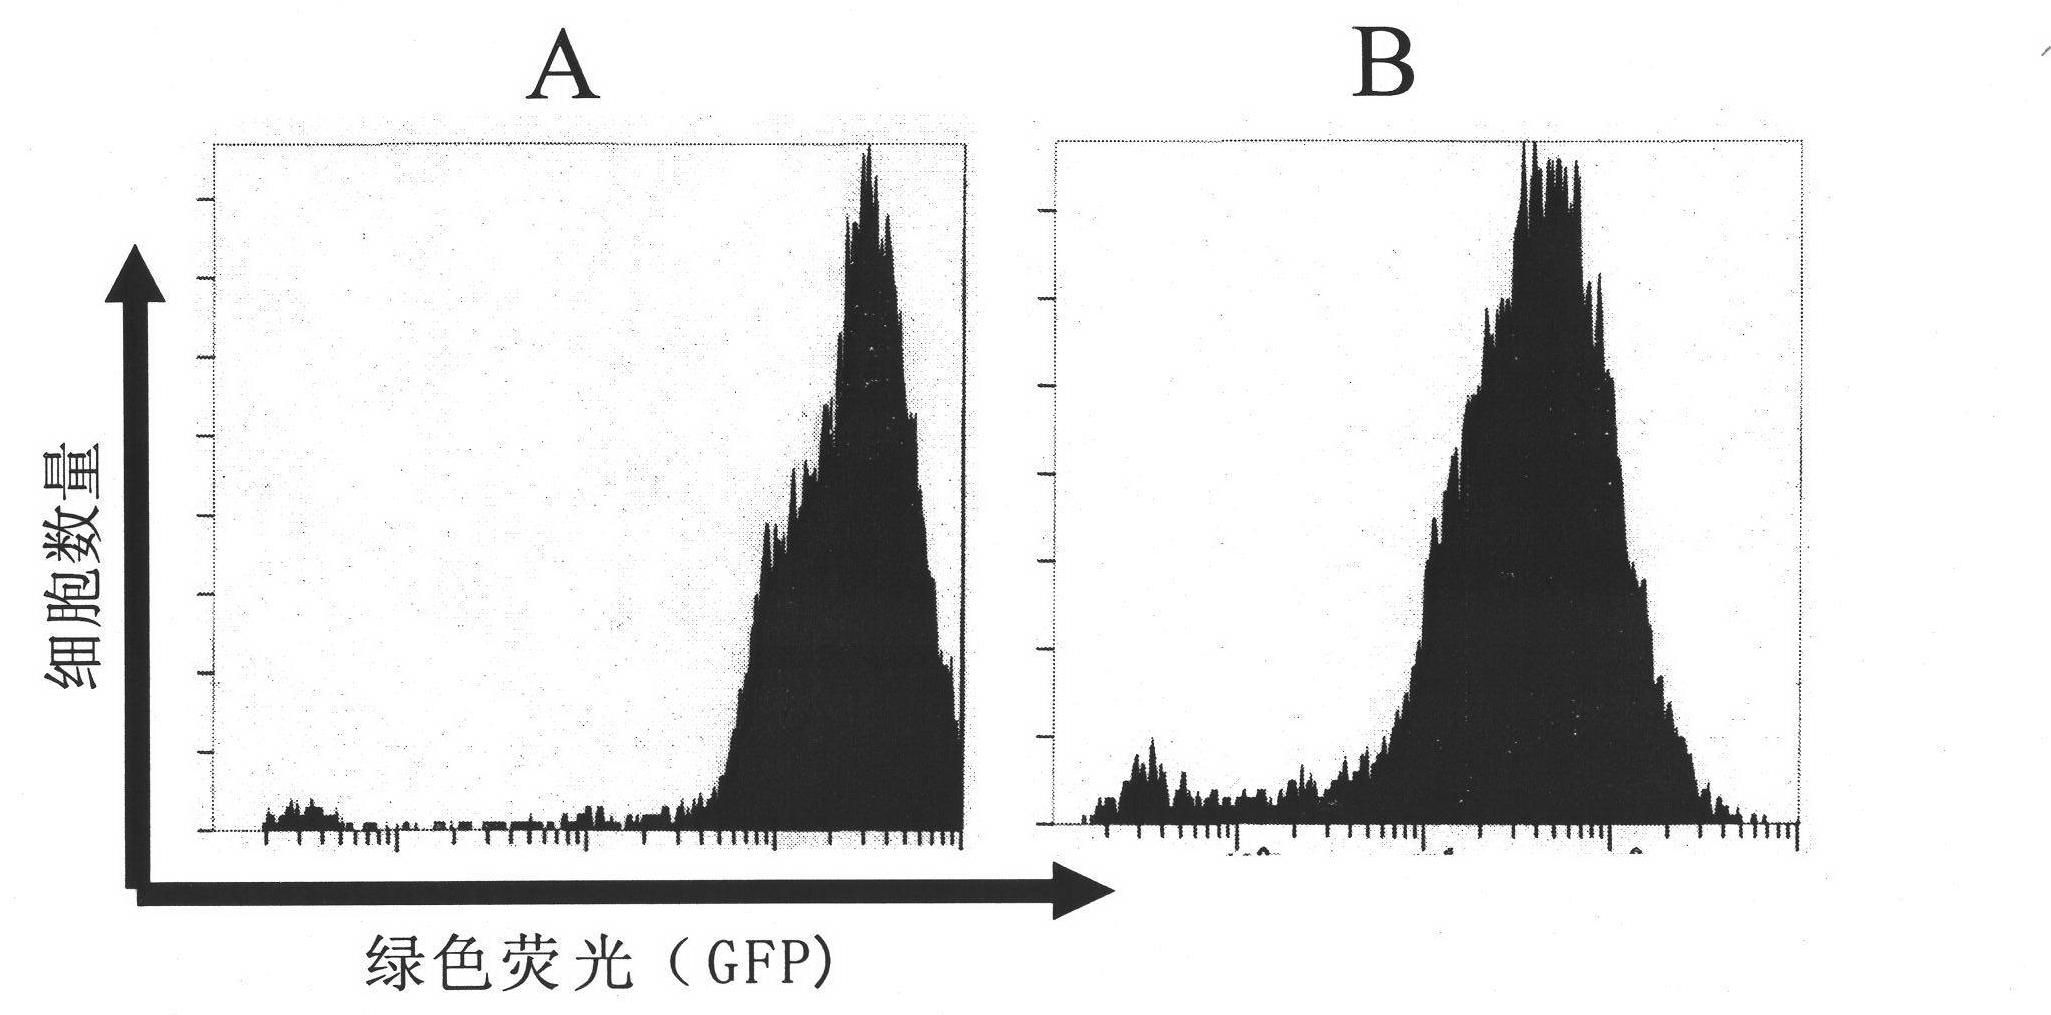 shRNA for inhibiting mouse TRAF6 gene expression and application thereof